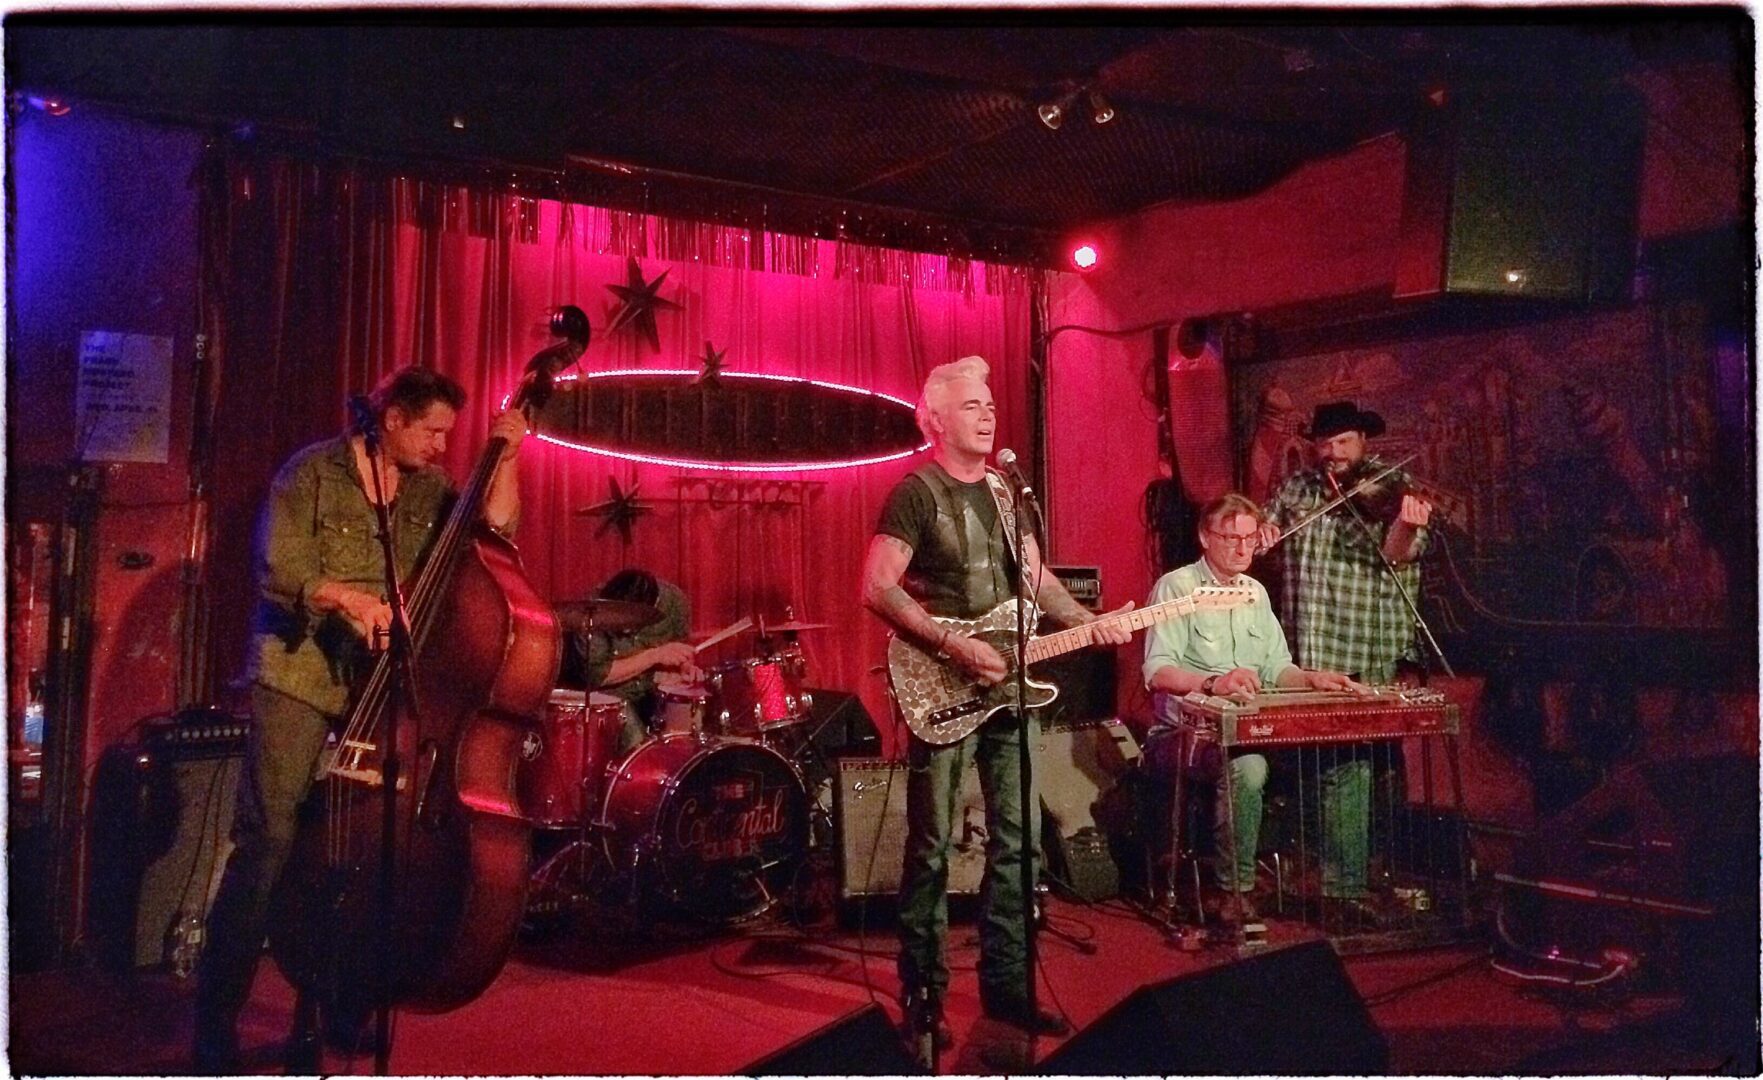 A group of musicians playing music in a bar.